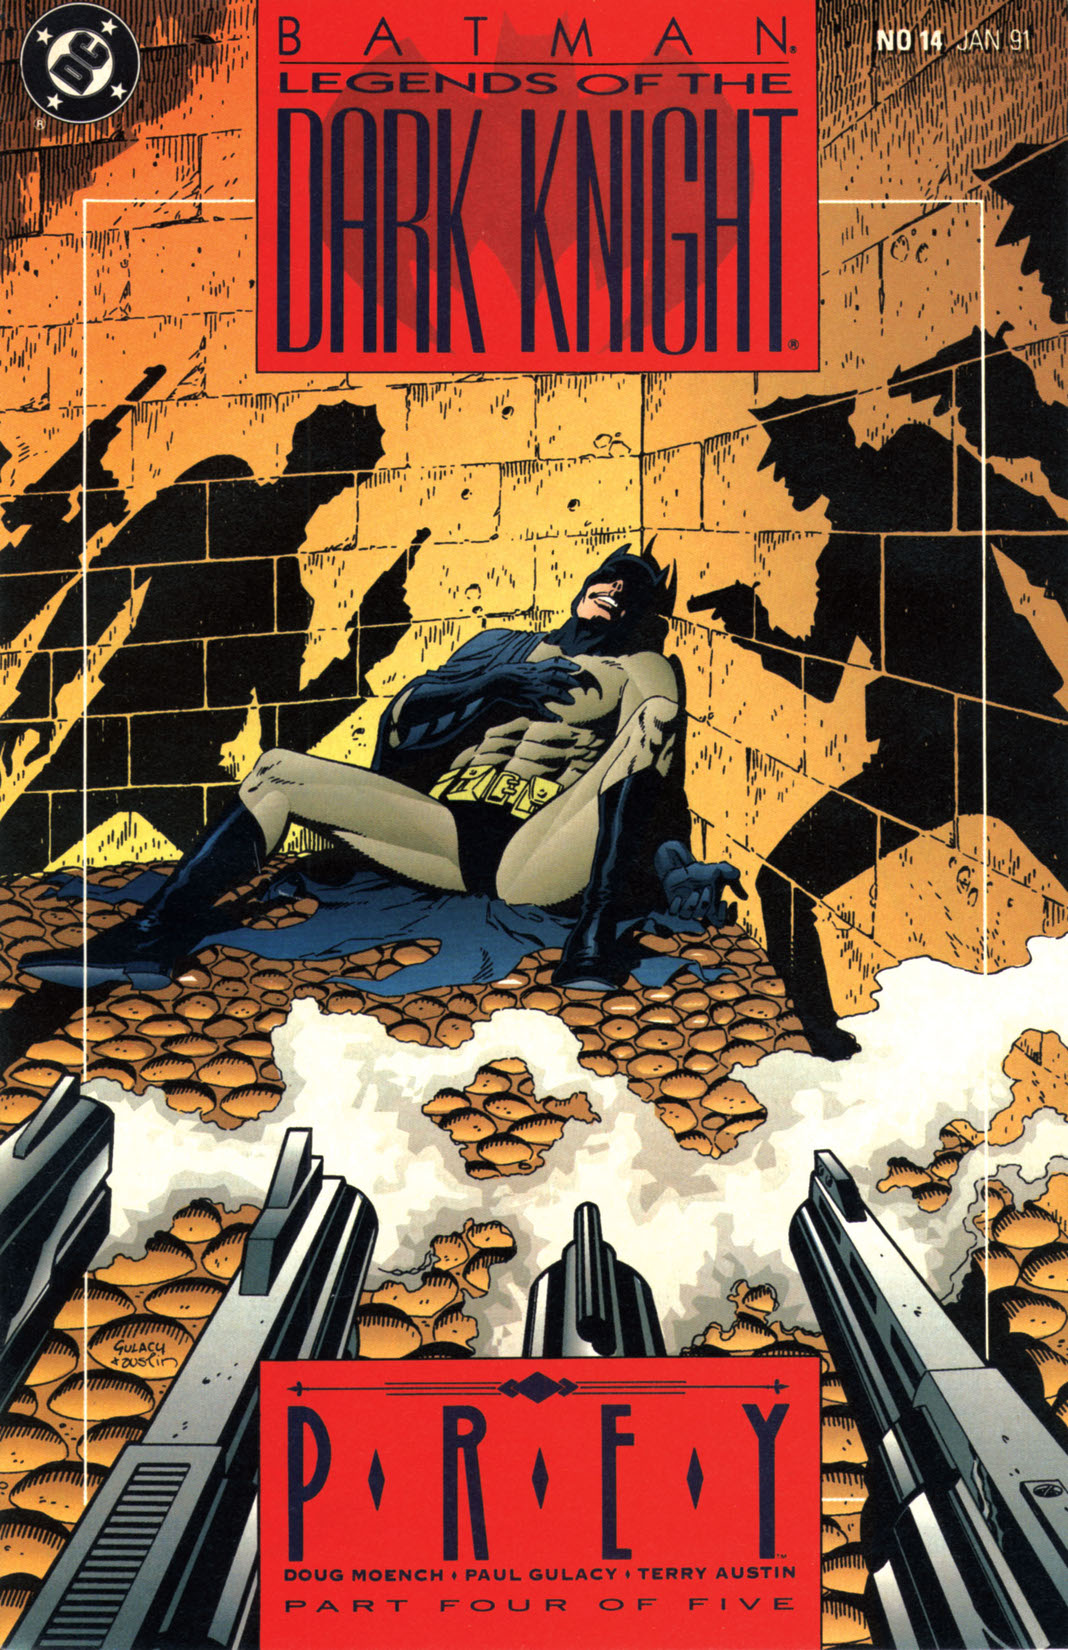 Batman: Legends of the Dark Knight #14 preview images